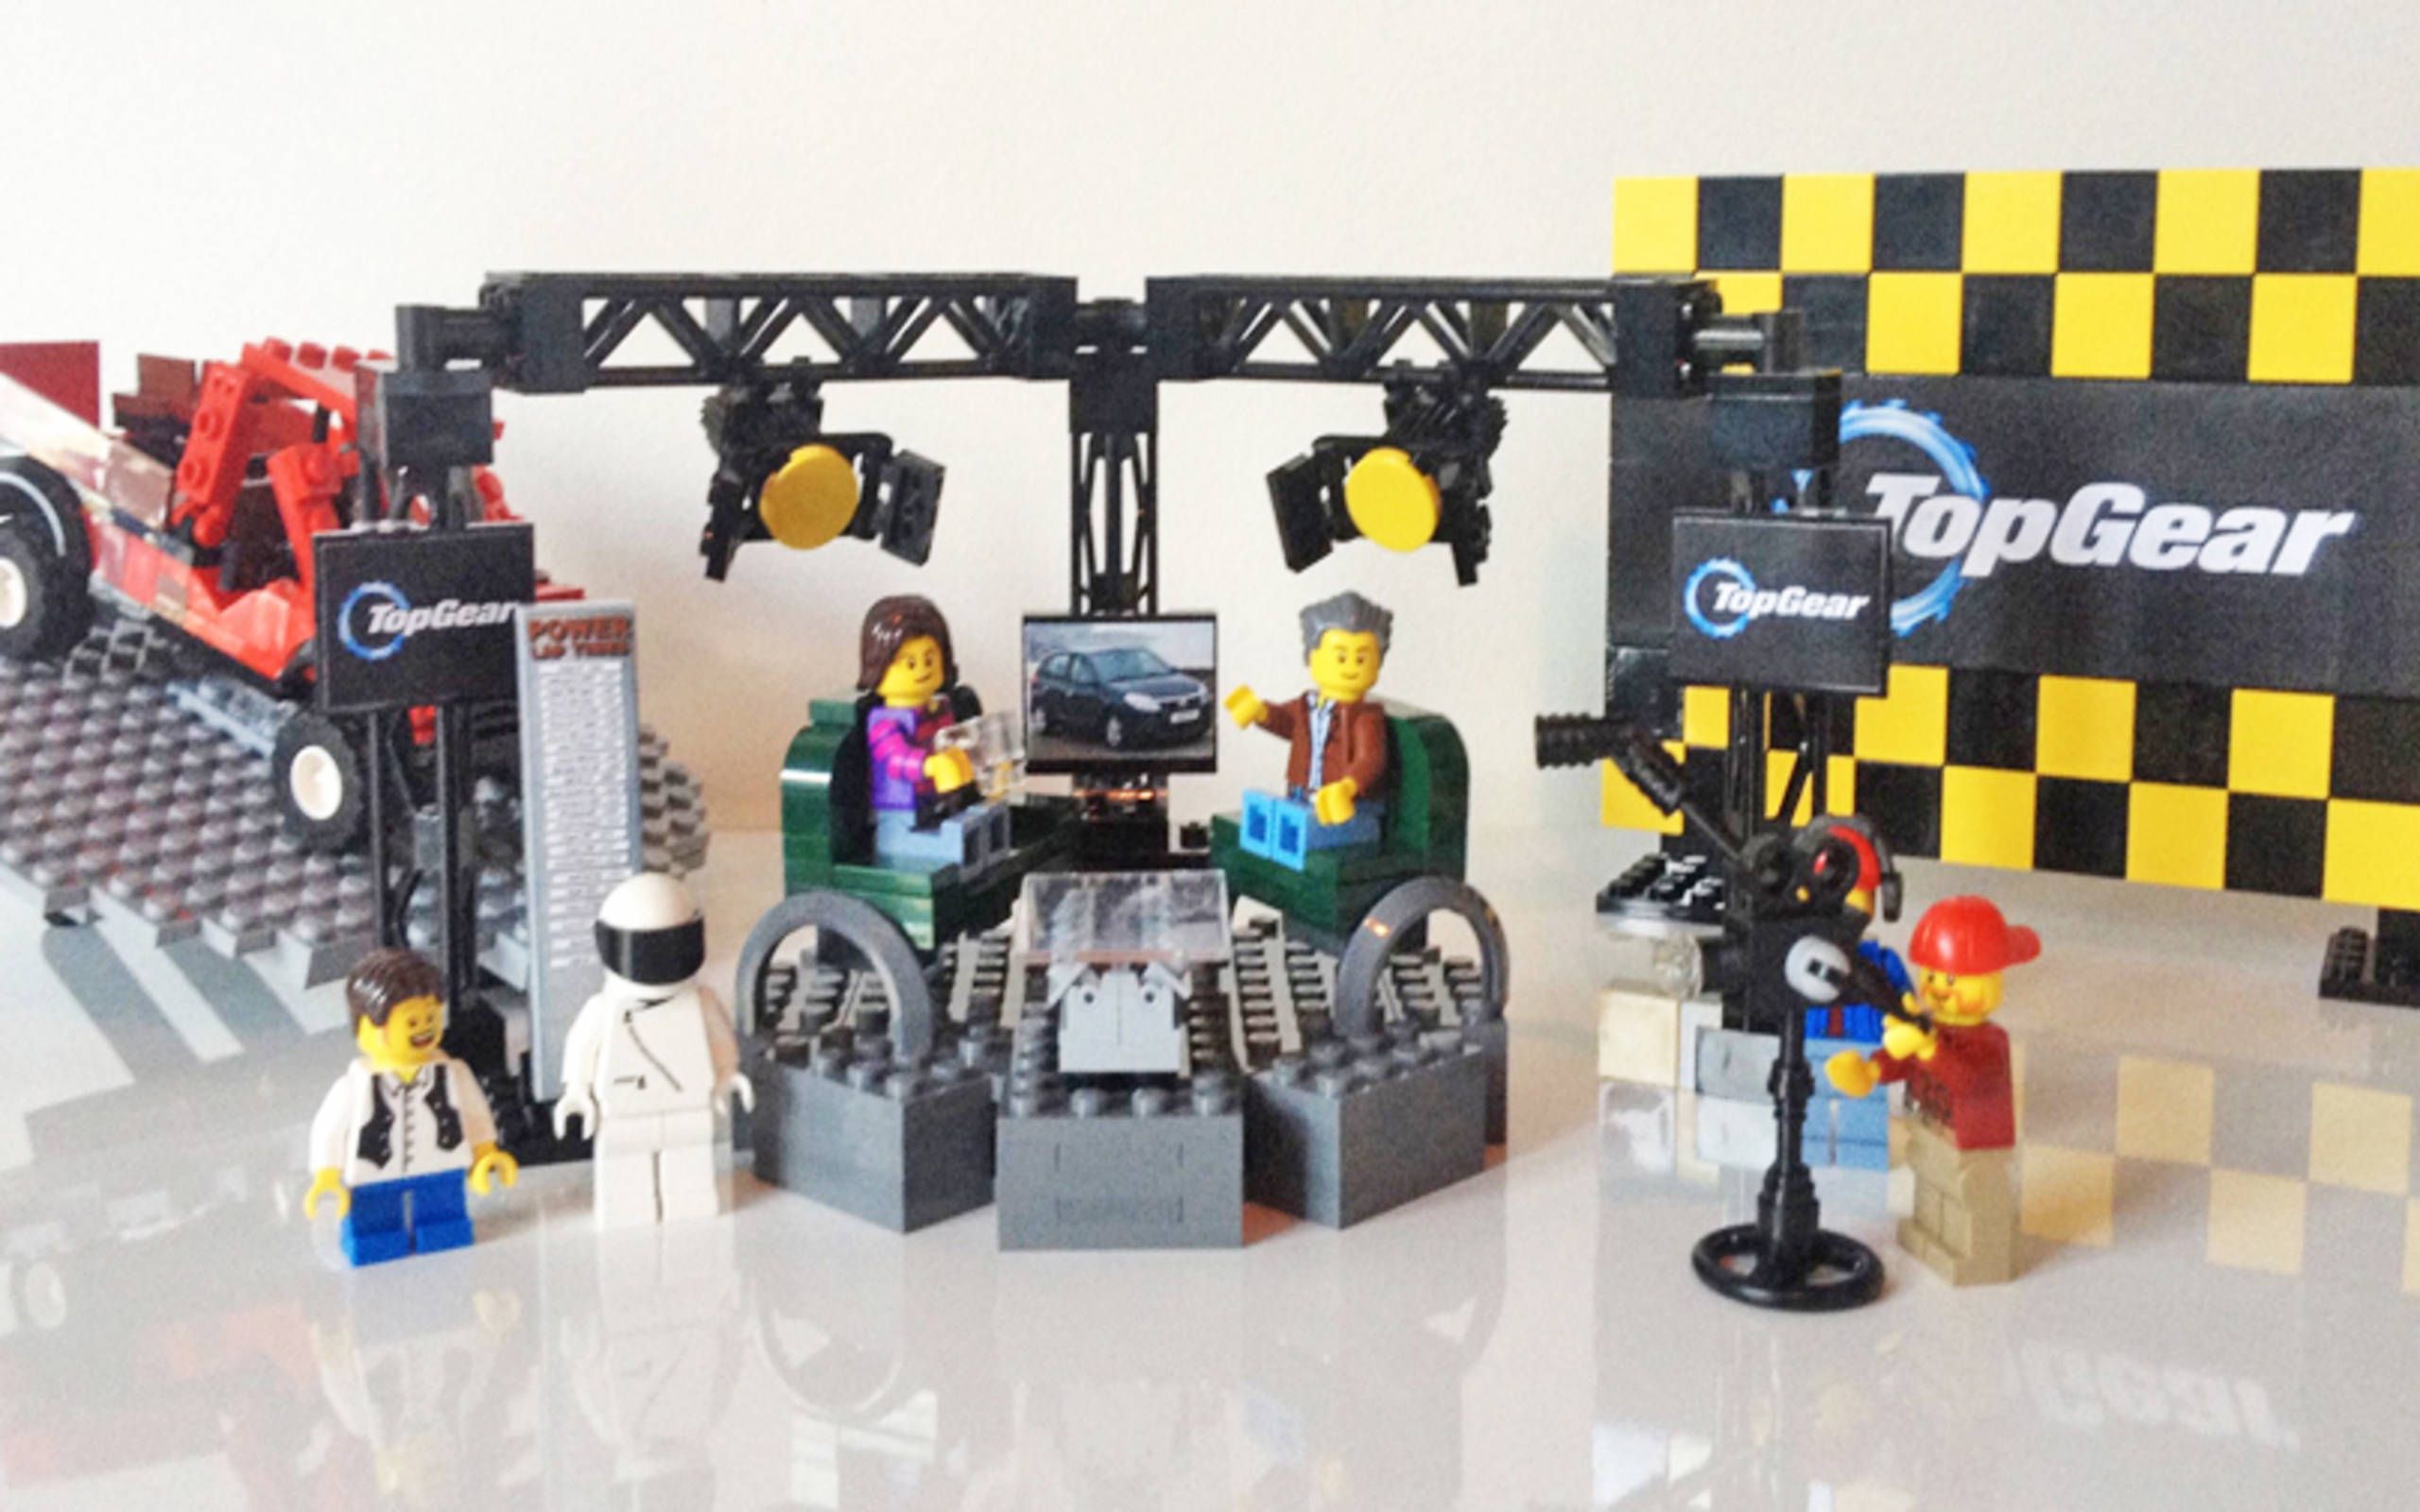 Gear' Lego set and cast needs your vote to get produced